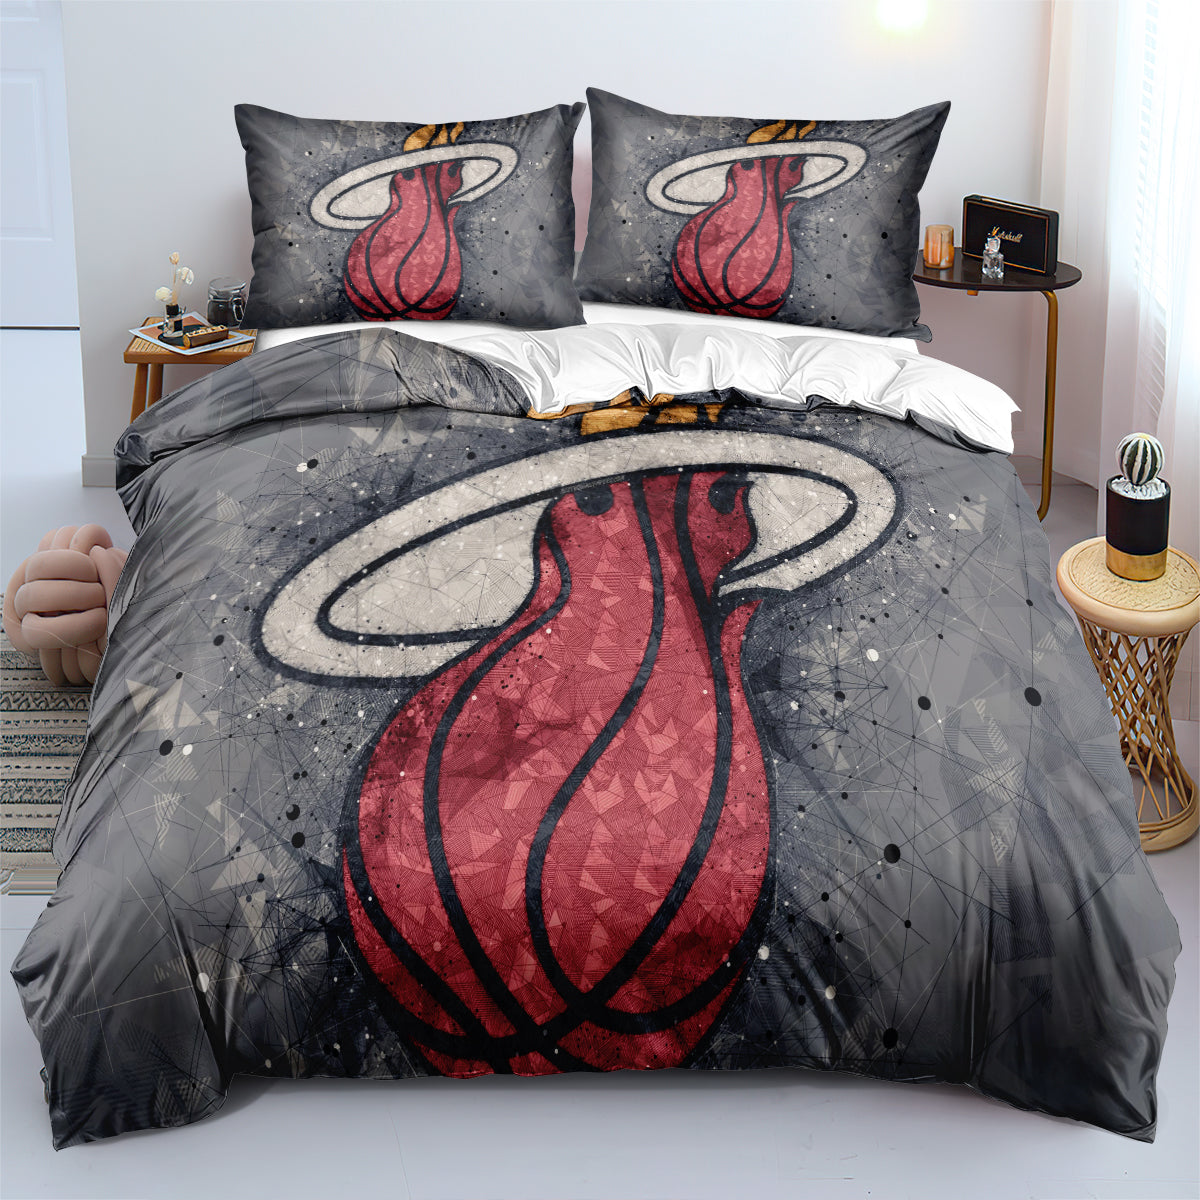 Miami Basketball Heat Bedding Set Quilt Cover Without Filler